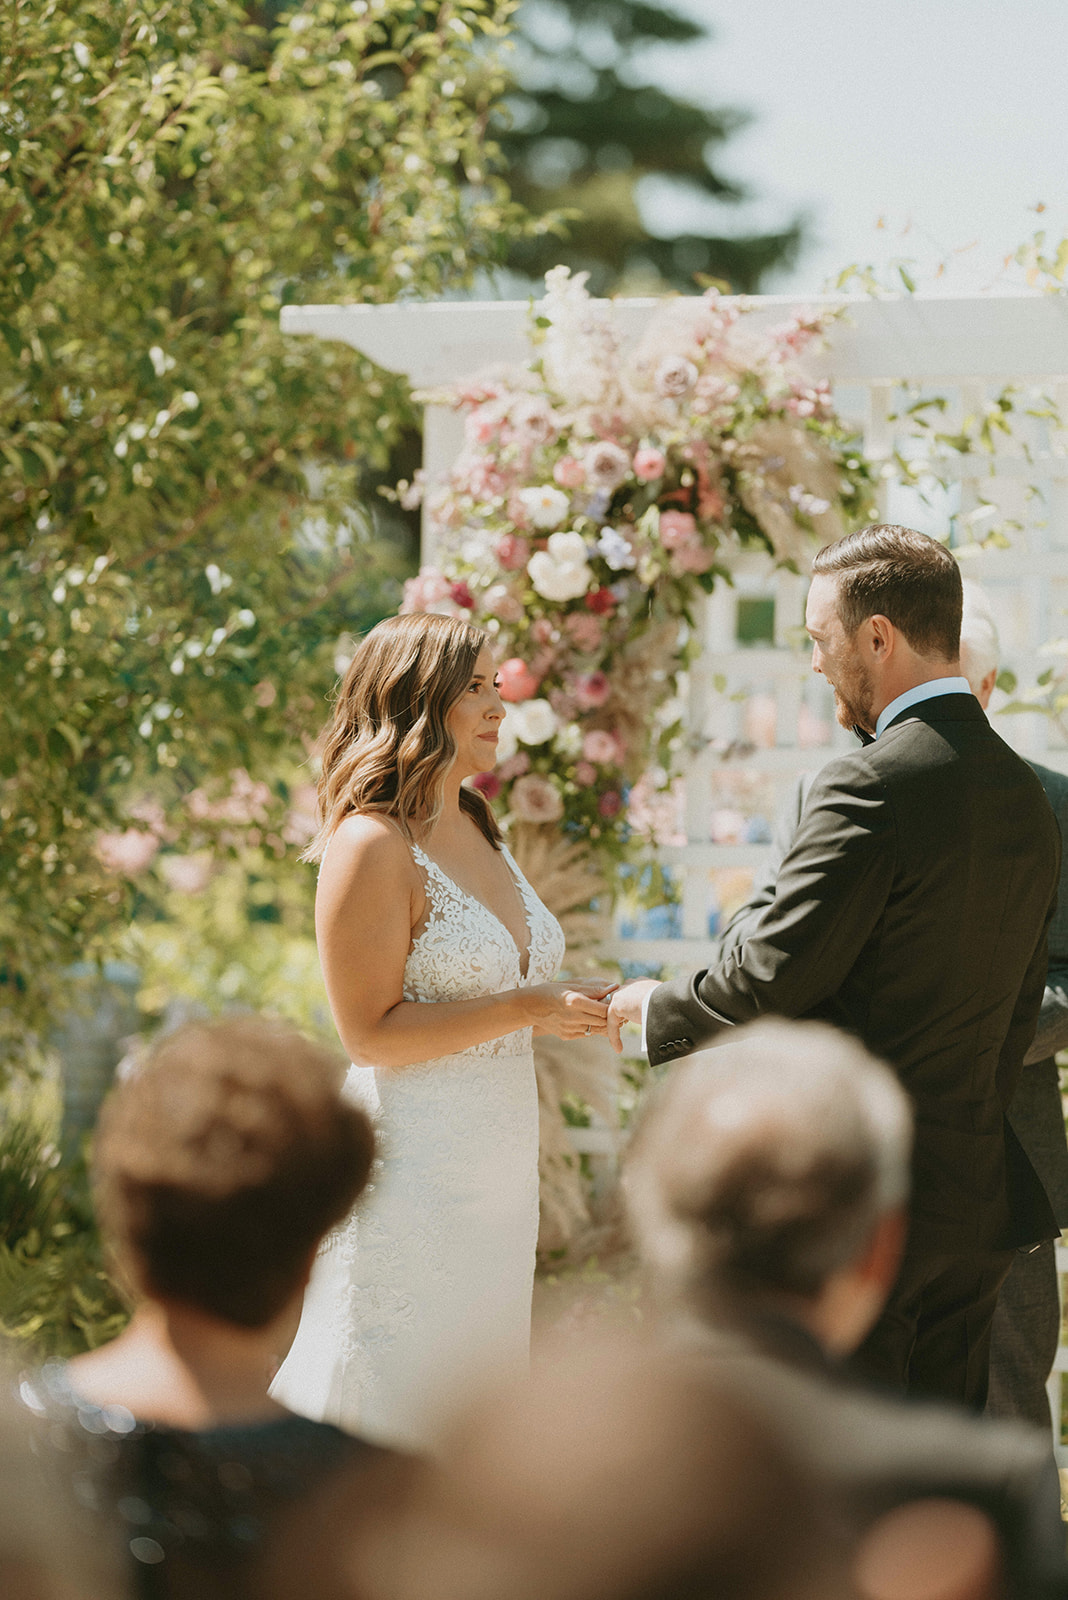 Outdoor summer wedding ceremony at the Deane House with bride and groom sharing their vows in front of a floral arch